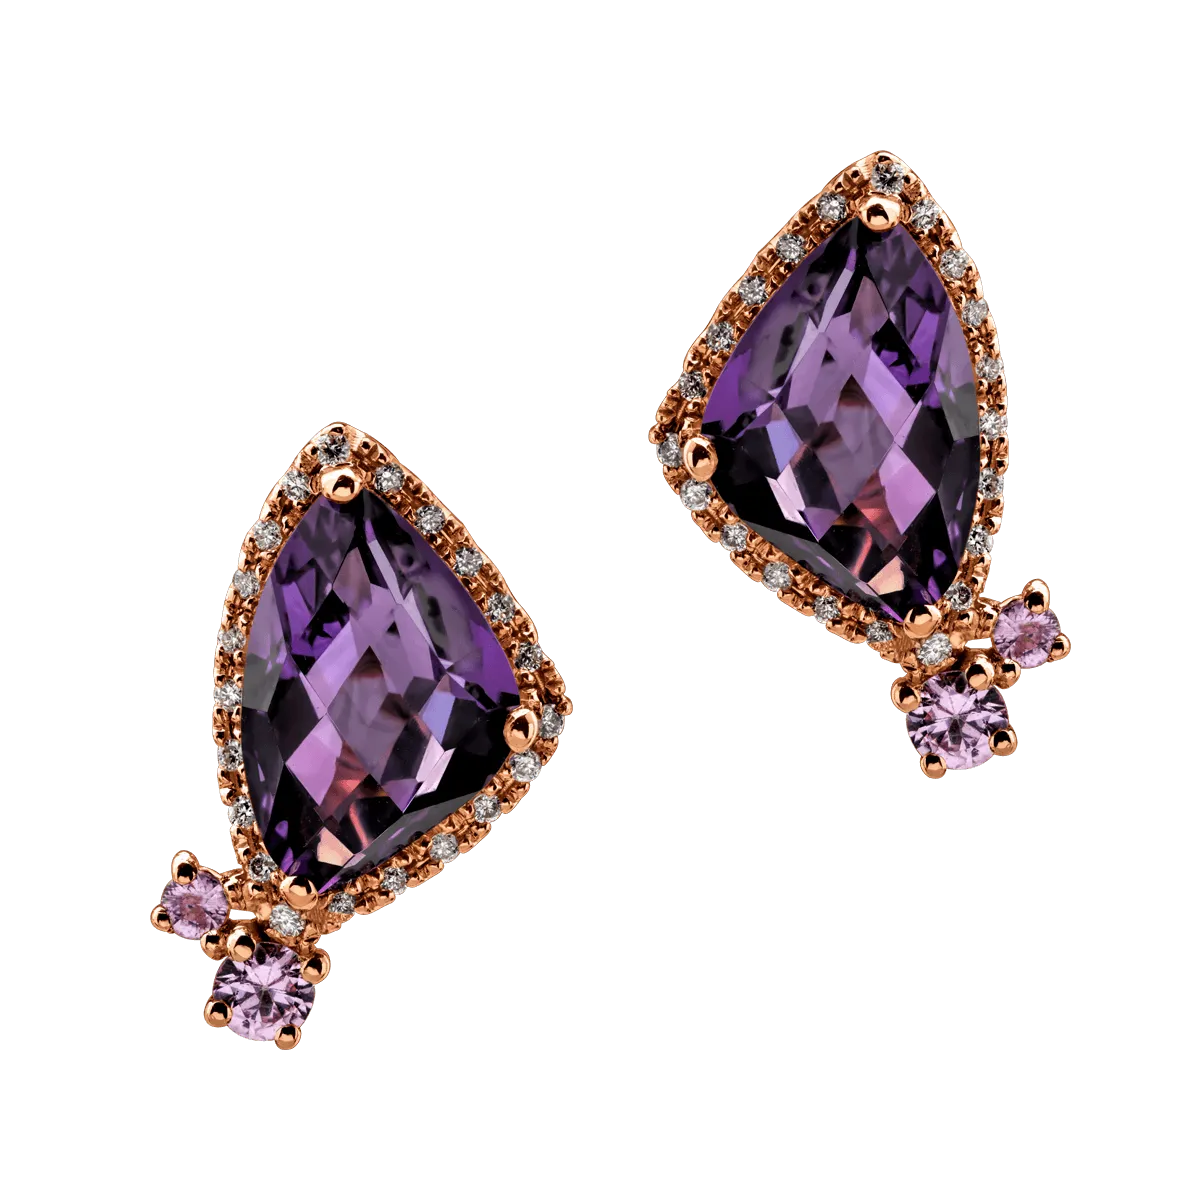 18K rose gold earrings with 4.36ct precious and semiprecious stones